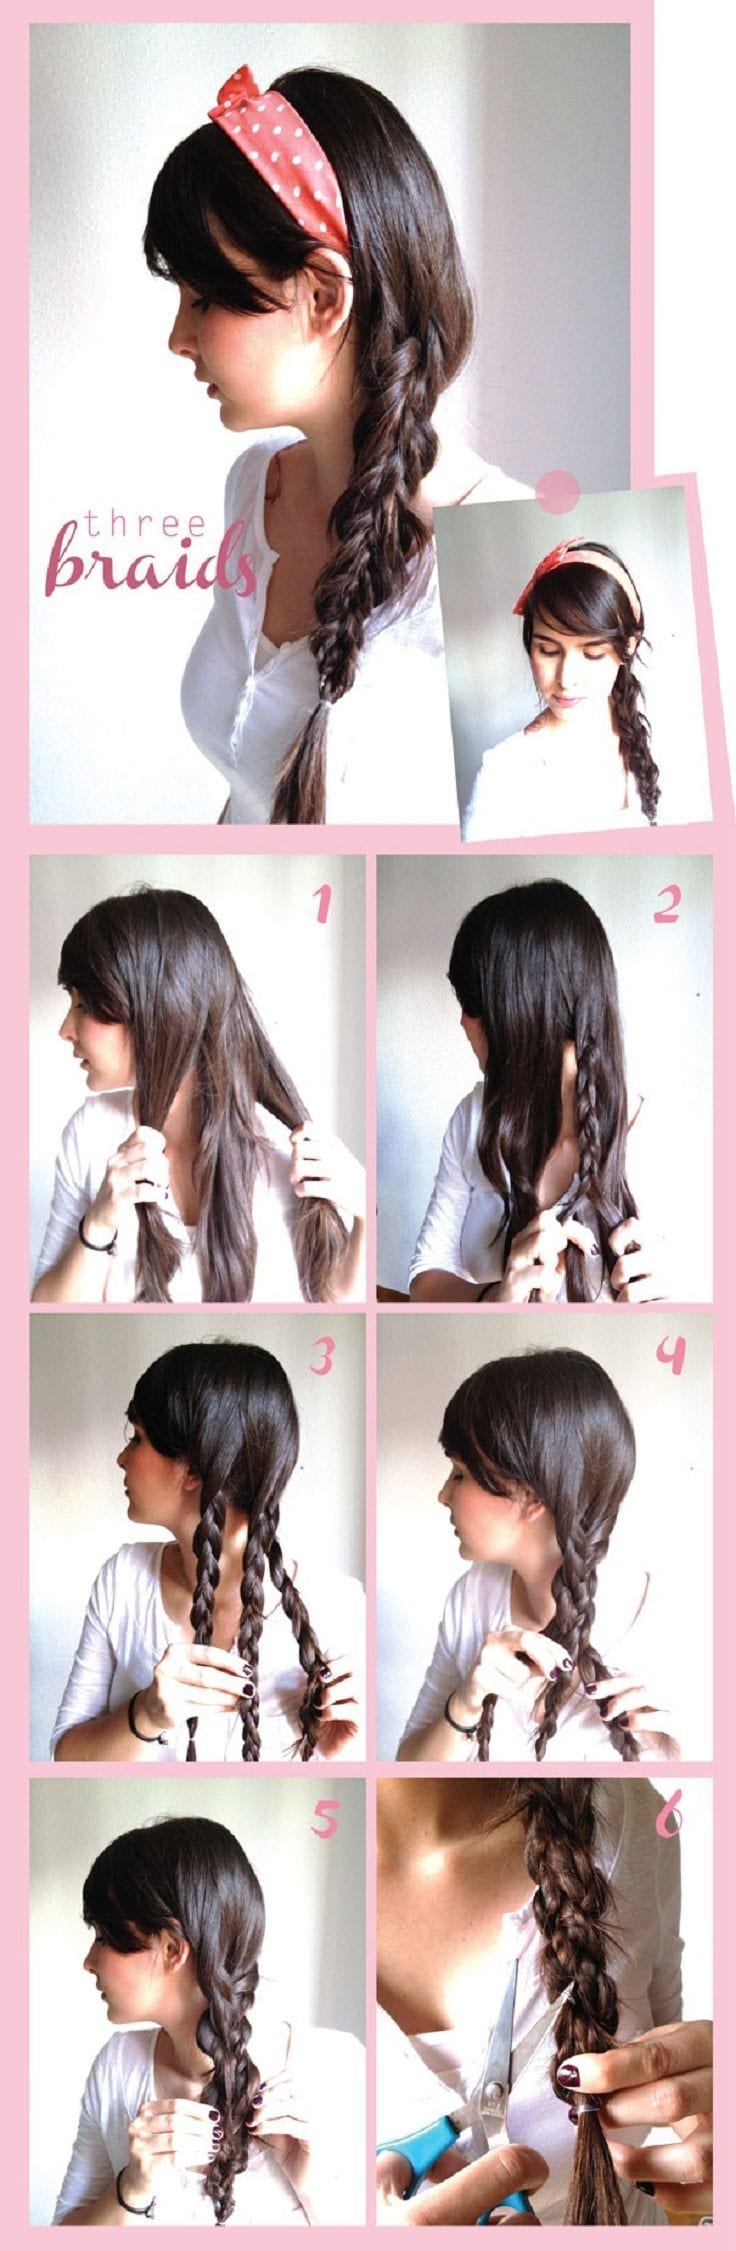 How to Braid Hair — Step-by-Step Photos and Video Tutorials